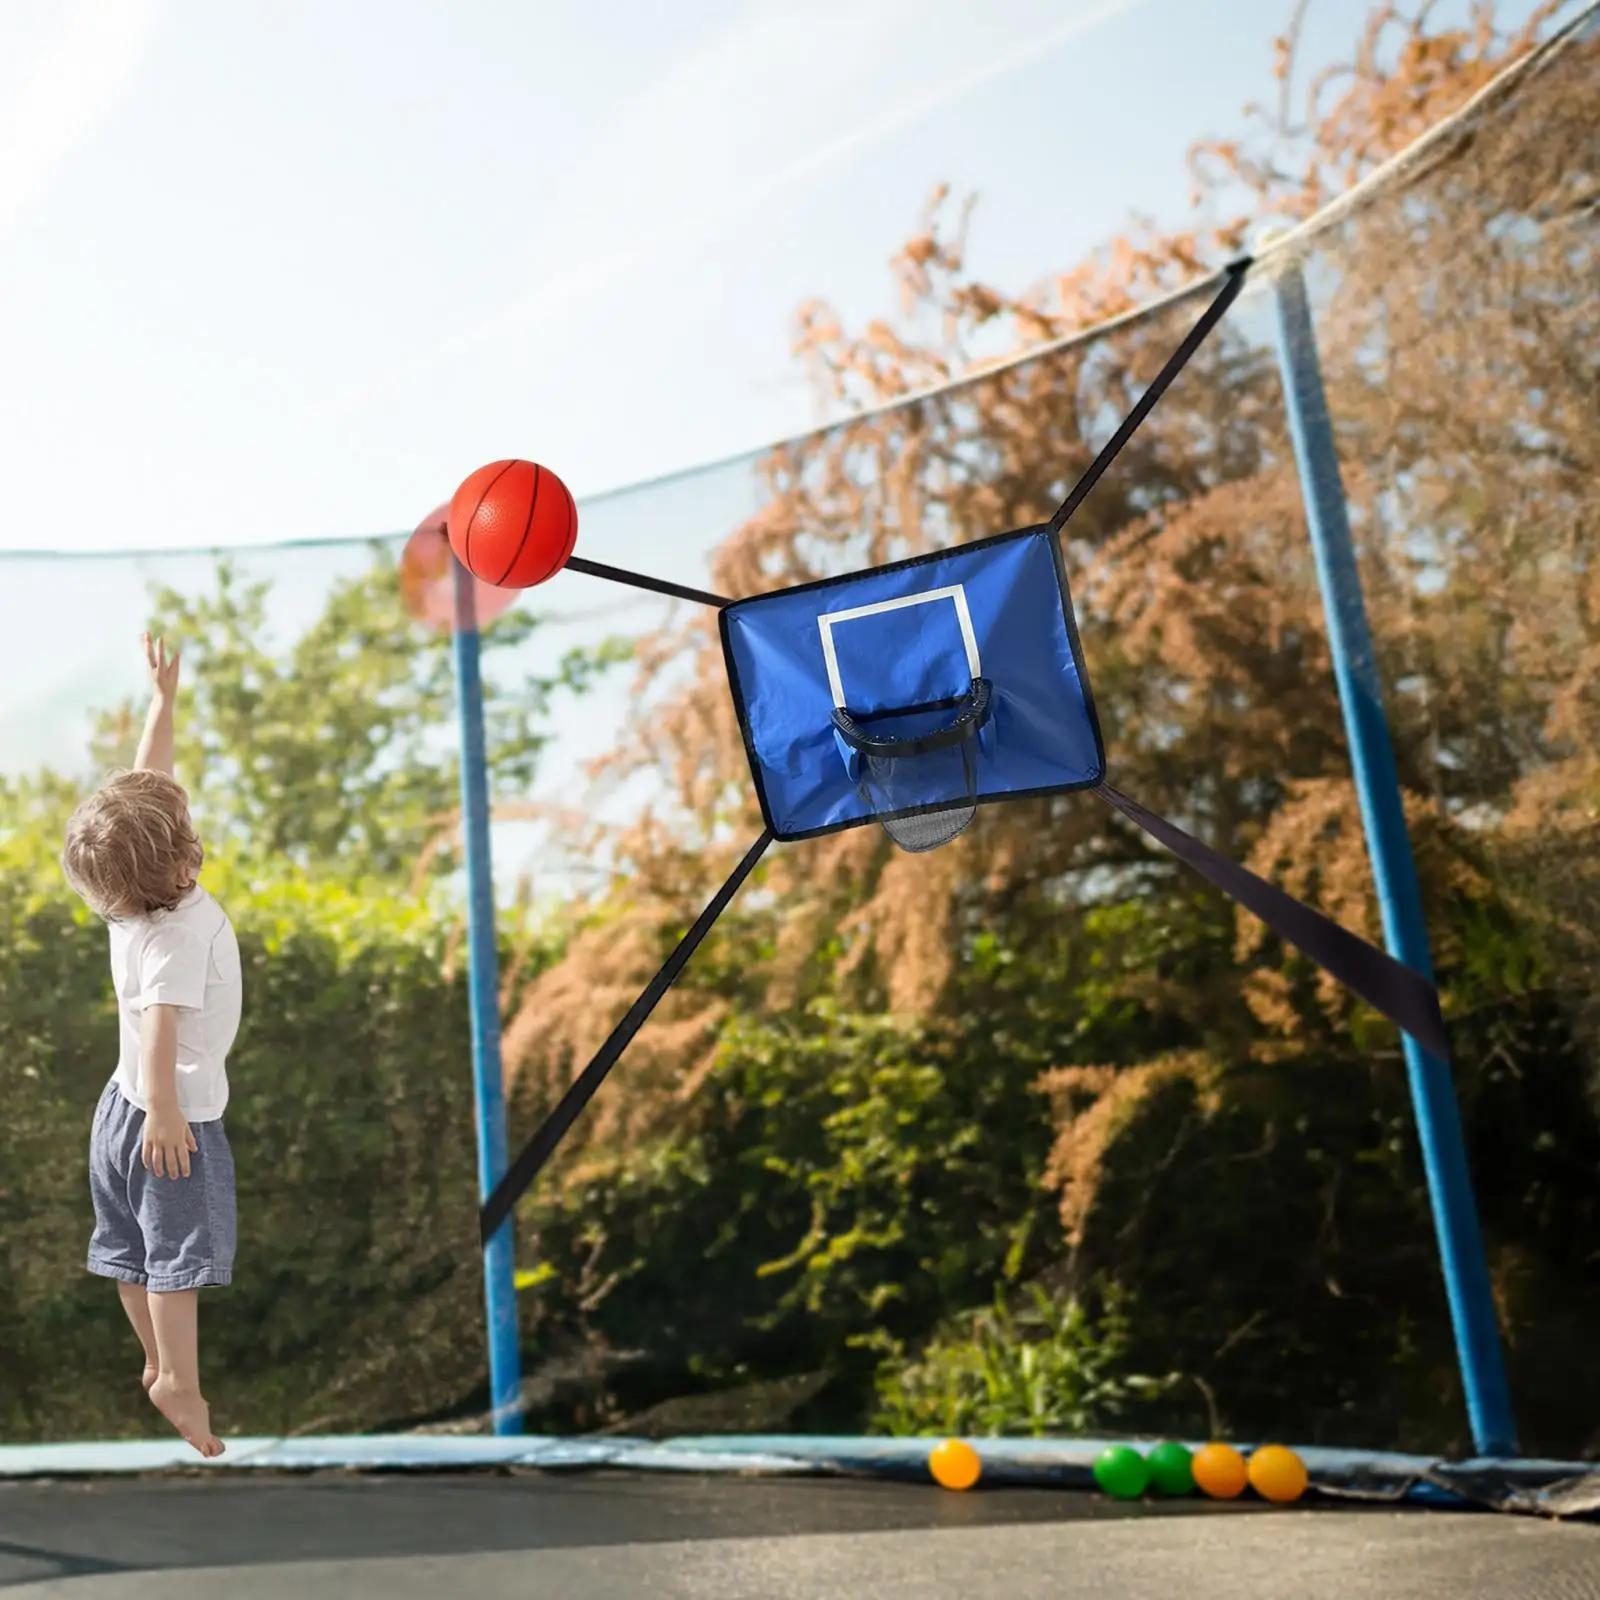 Basketball Hoop for Trampoline with Mini Basketball and Pump Waterproof Sports Toys Universal Trampoline Accessory for All Ages